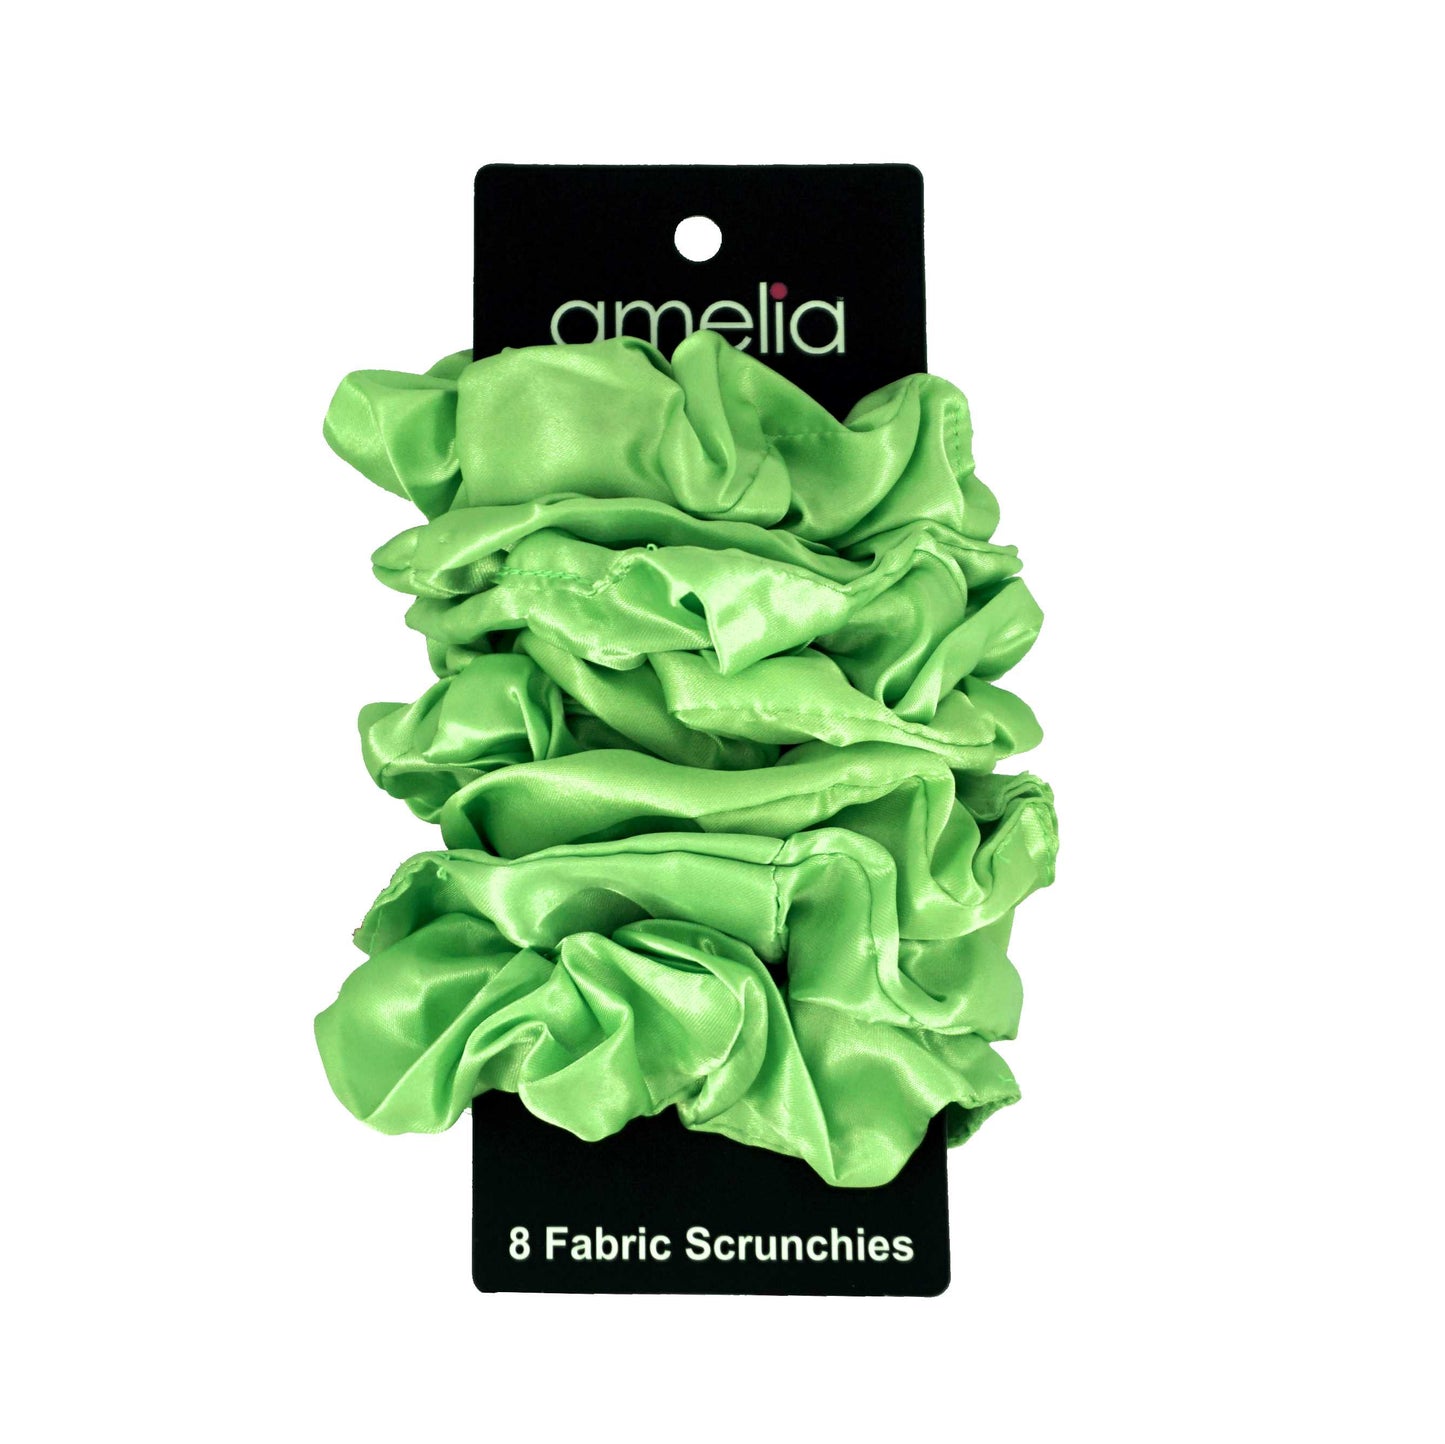 Amelia Beauty Products, Lime Satin Scrunchies, 3.5in Diameter, Gentle on Hair, Strong Hold, No Snag, No Dents or Creases. 8 Pack